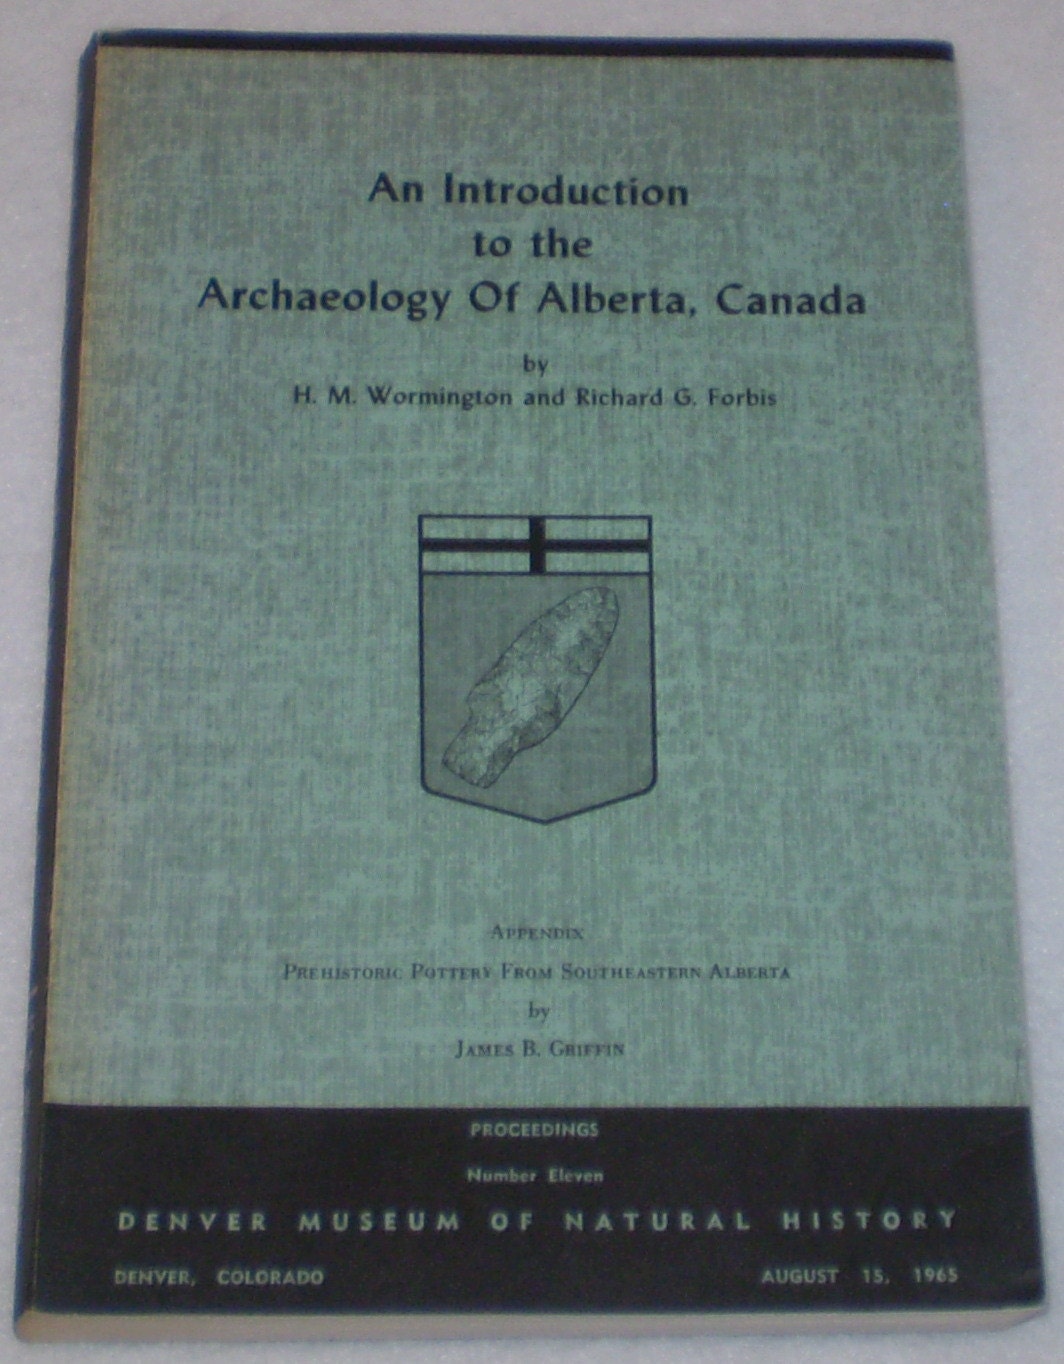 An introduction to the archaeology of Alberta, Canada, (Denver Museum of Natural History. Proceedings) H. M Wormington